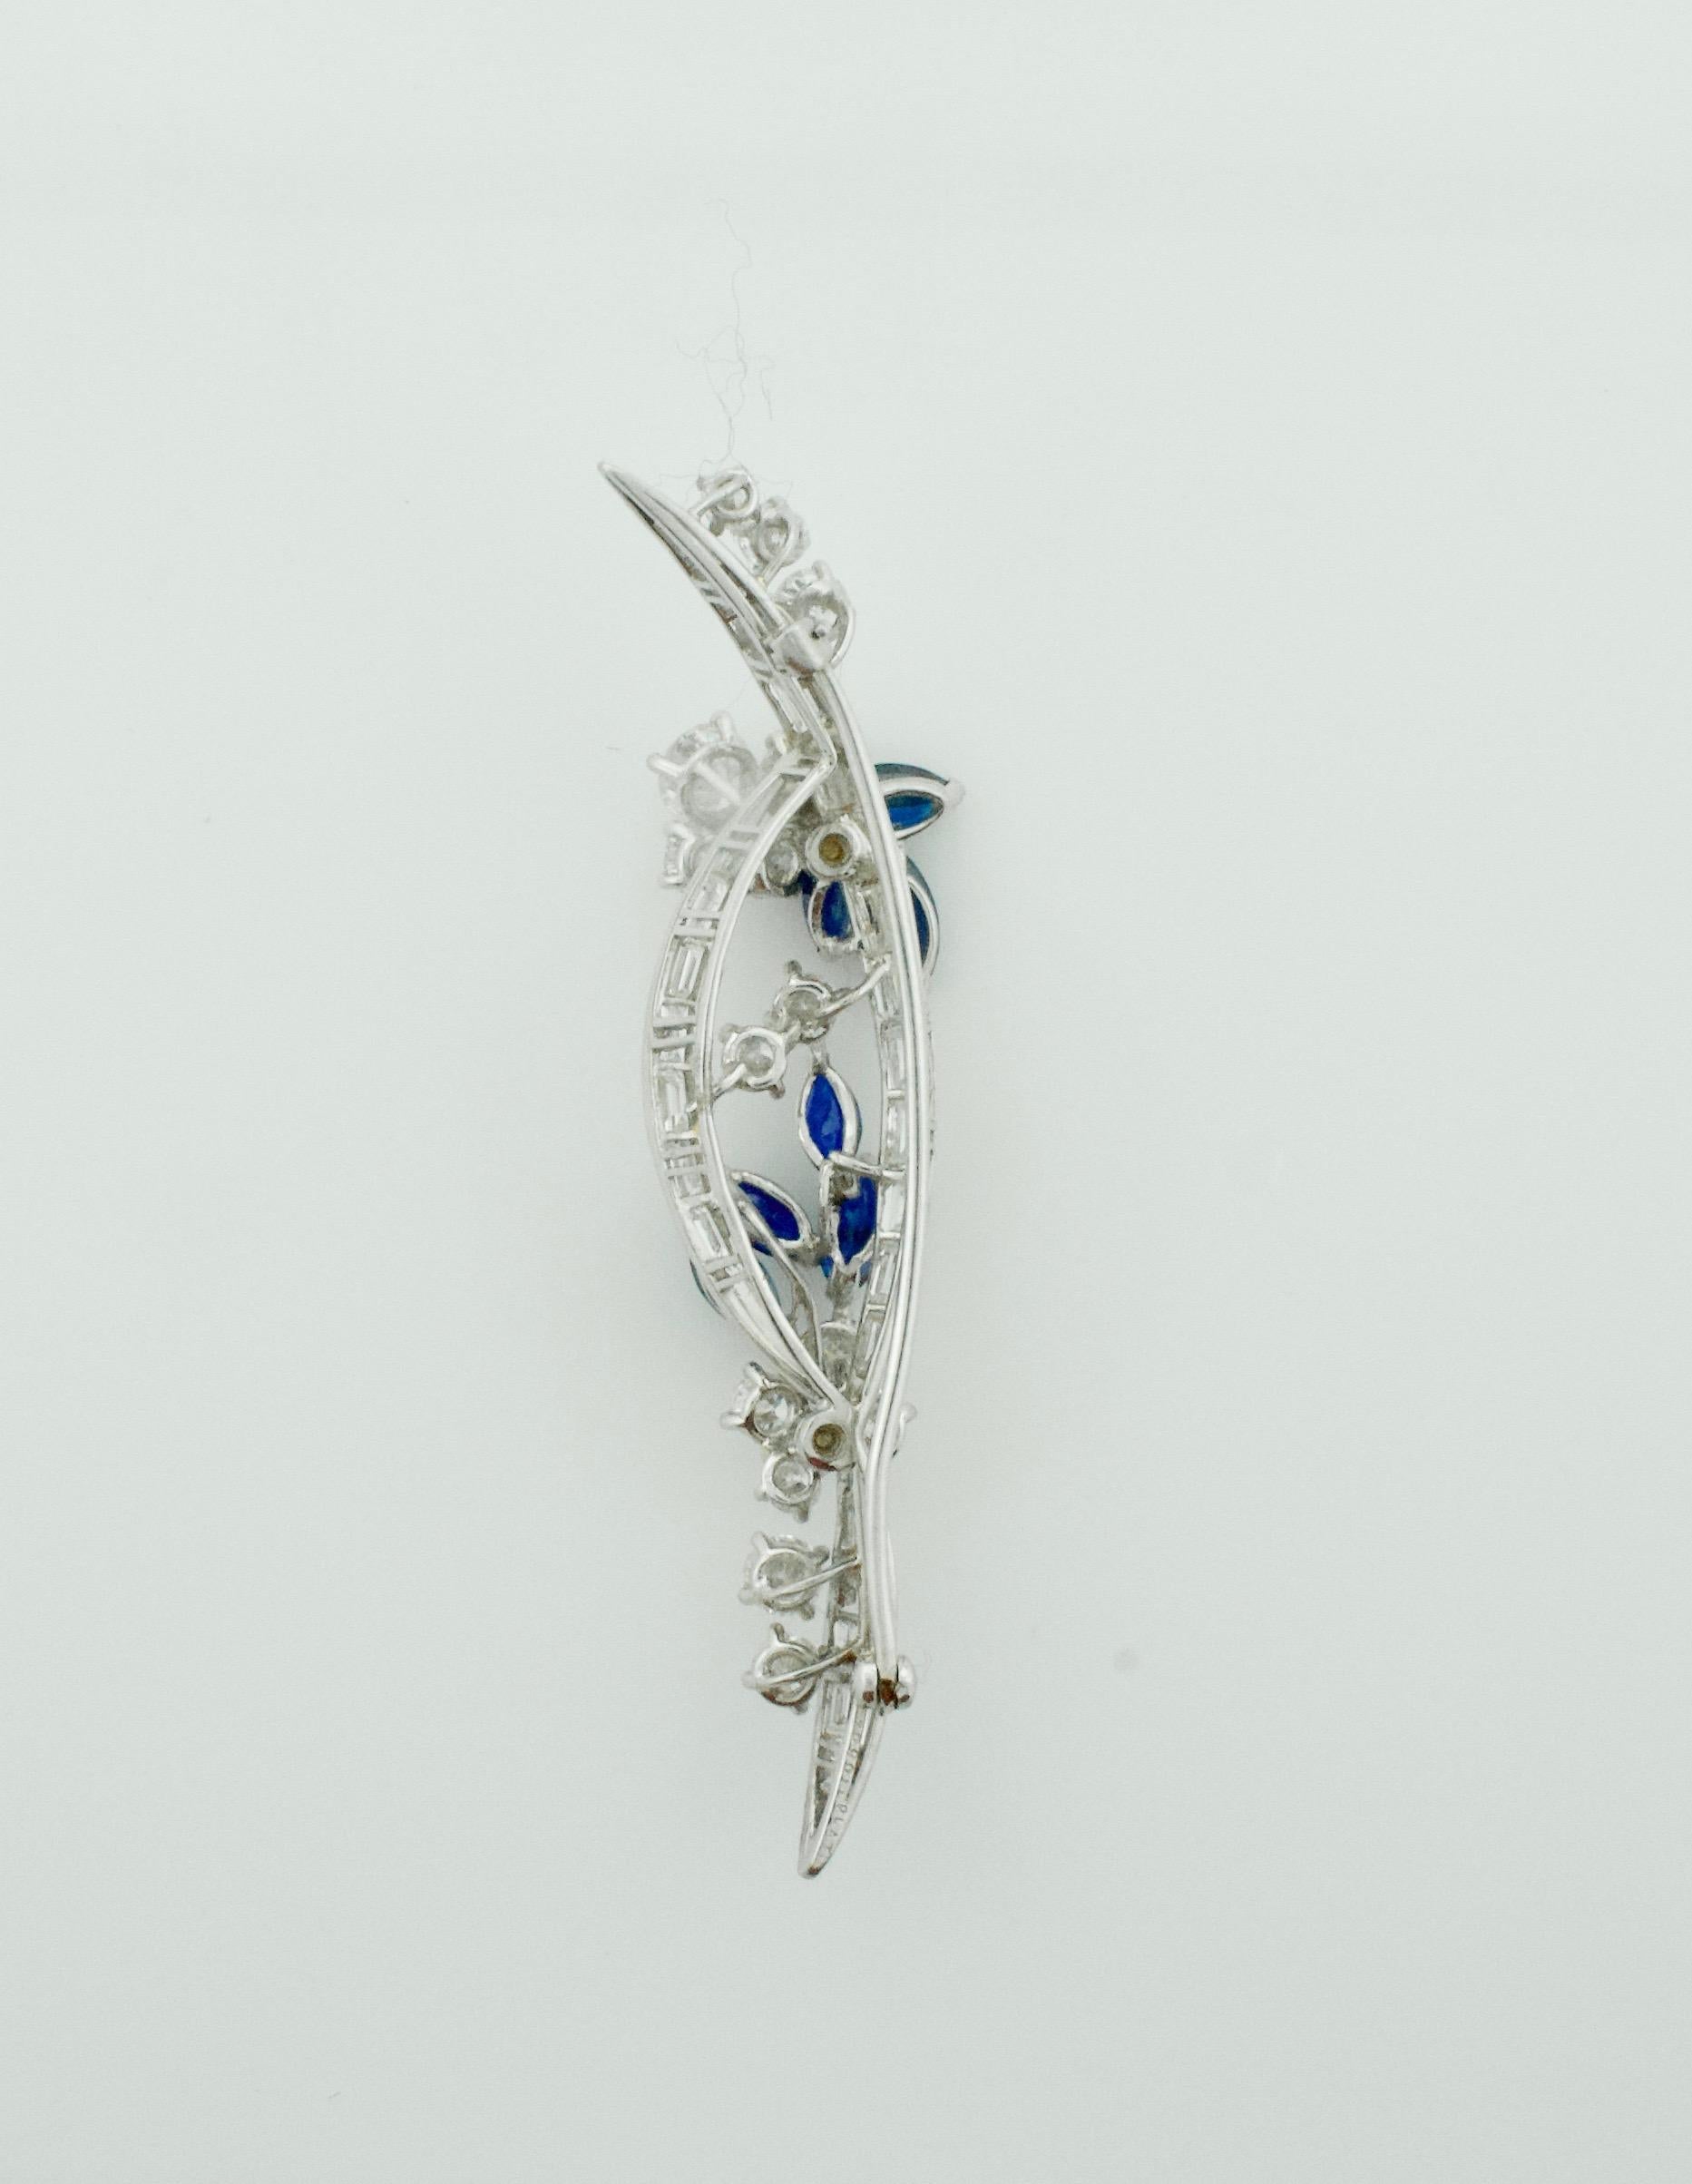 Marquise Cut Sapphire and Diamond Brooch by Oscar Heyman and Brothers For Sale